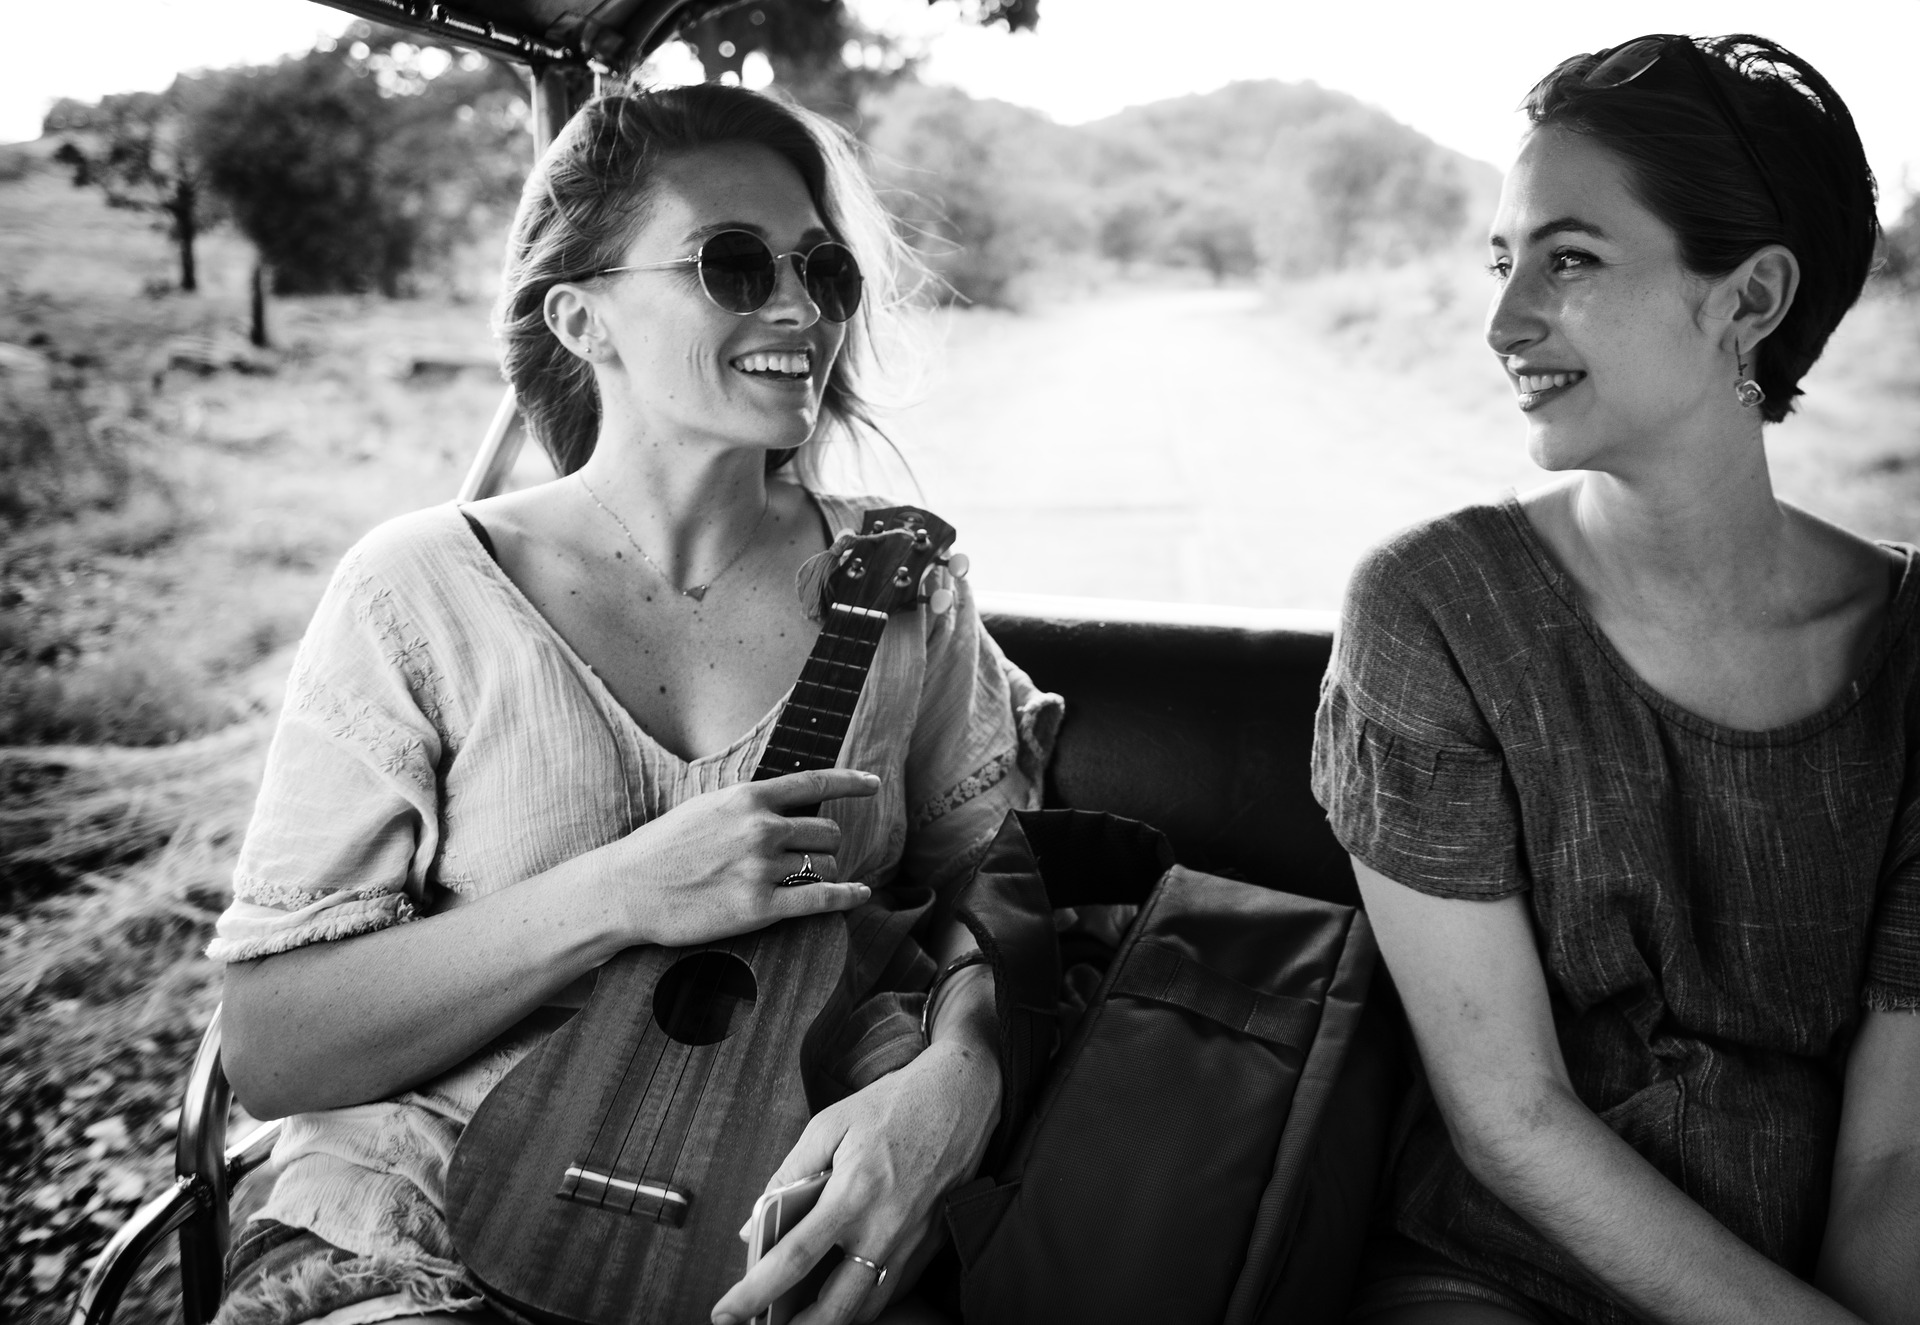 Two girls travelling photo